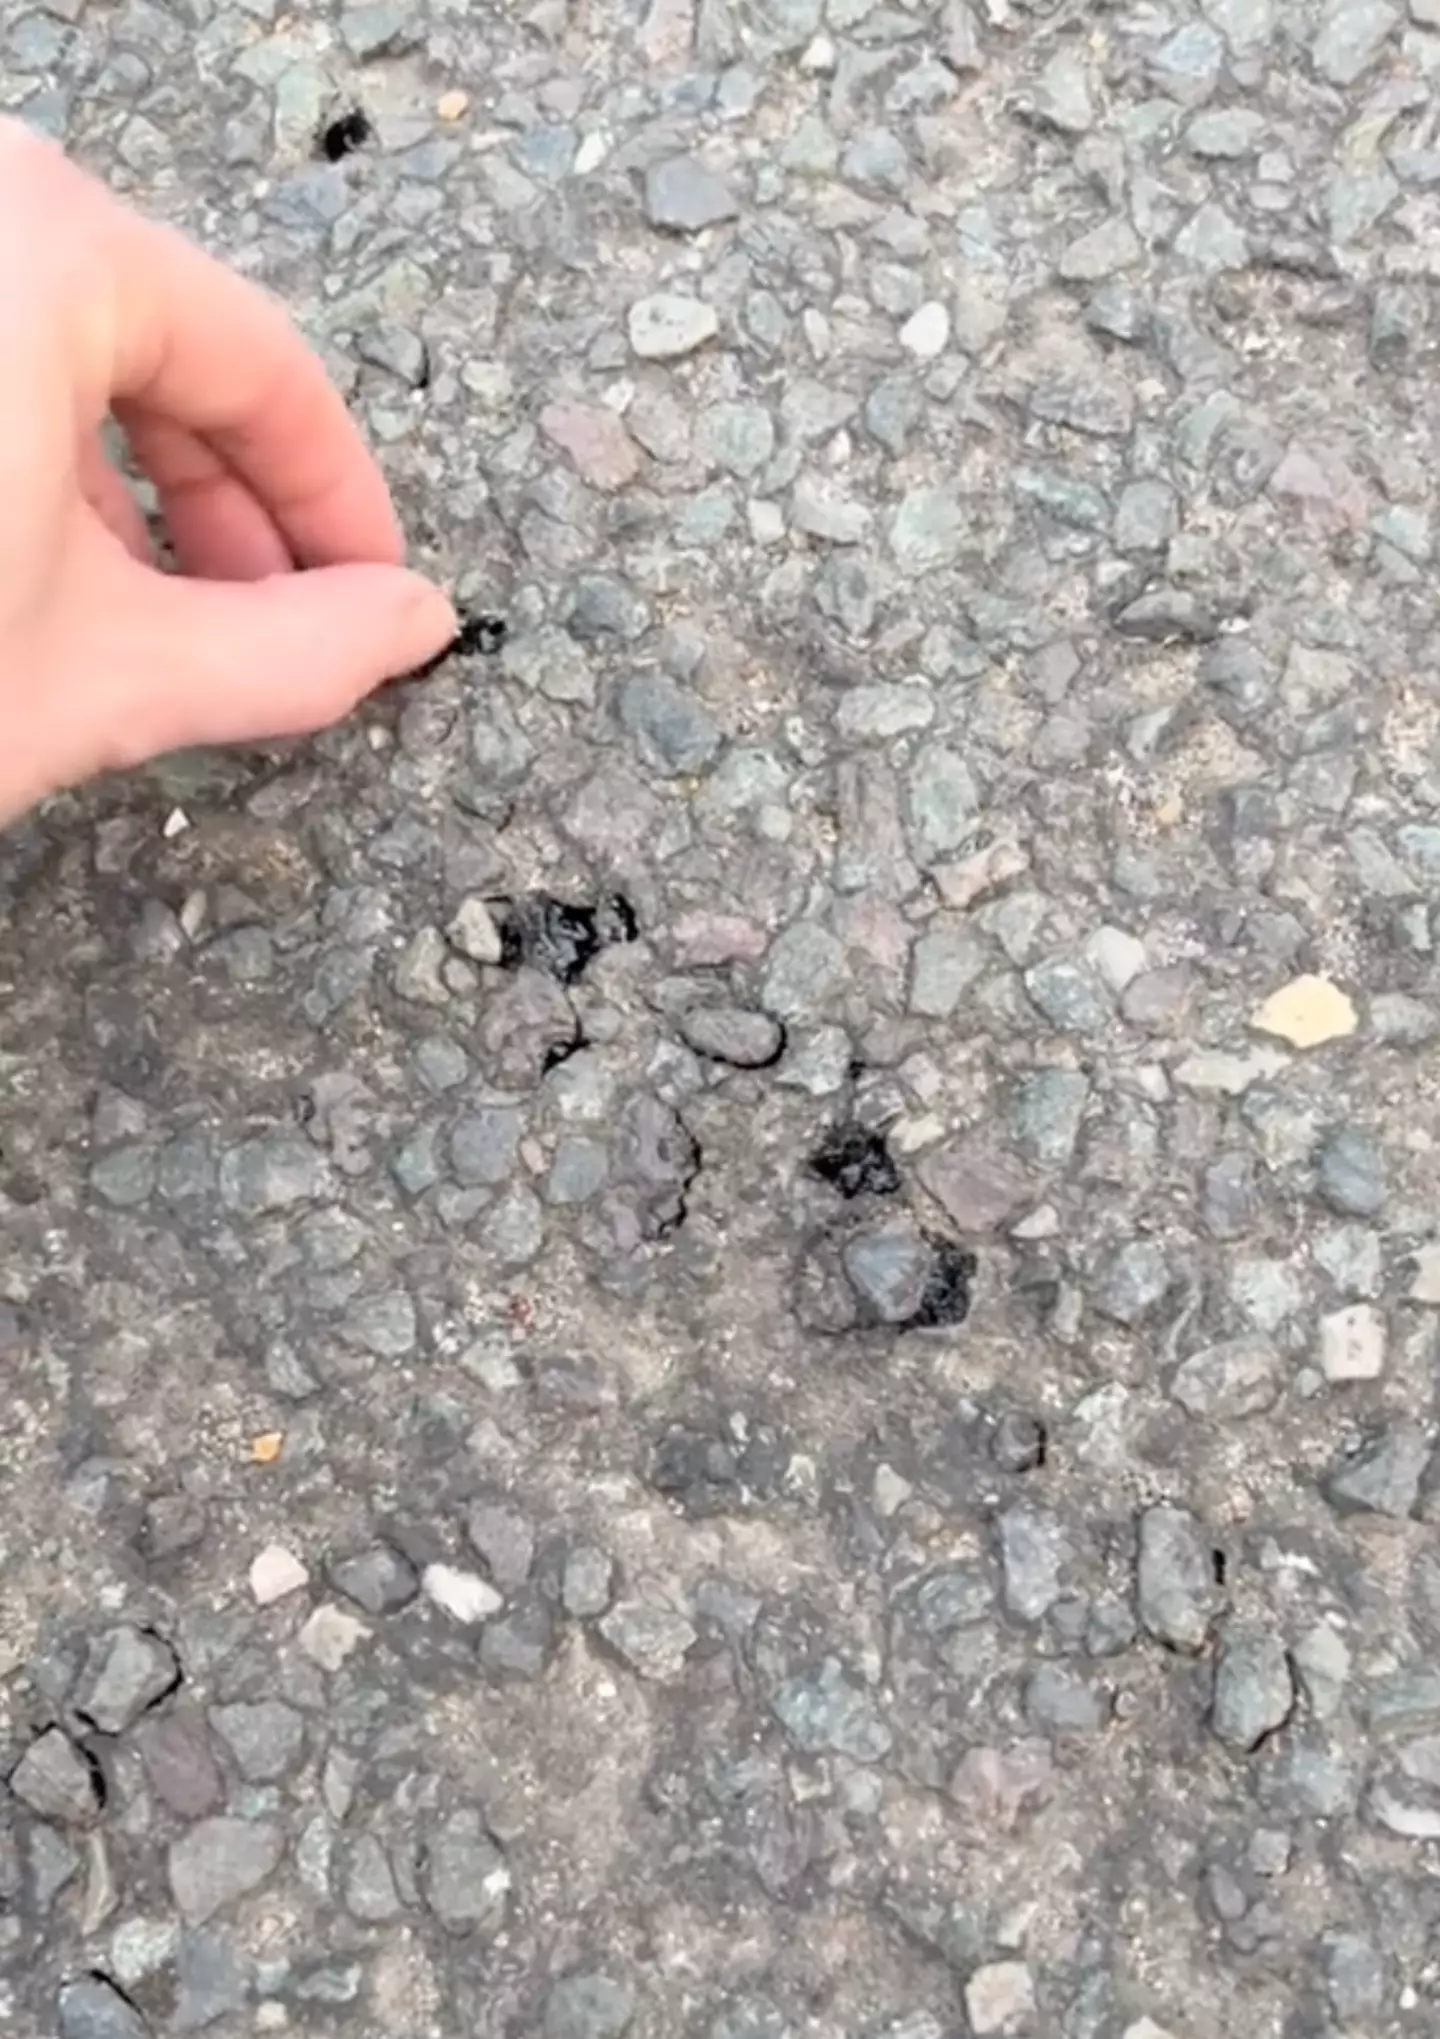 One TikTok user was able to pick the road apart after it had 'melted'.